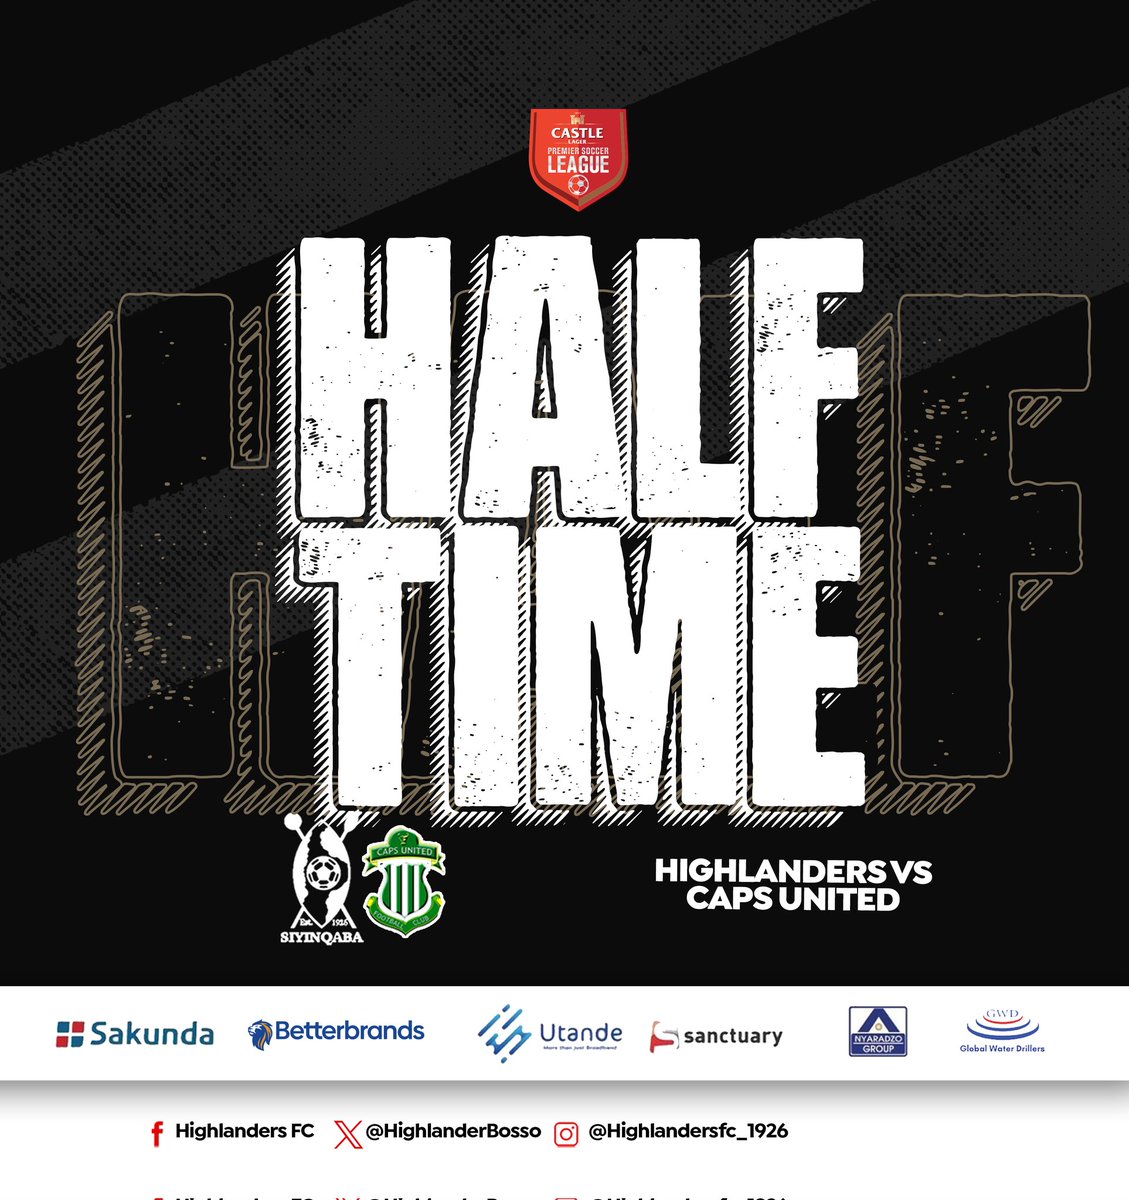 HT' Half Time The breather has been called, we have the two goal lead.  Highlanders FC 2-0 Caps United FC  #Bosso